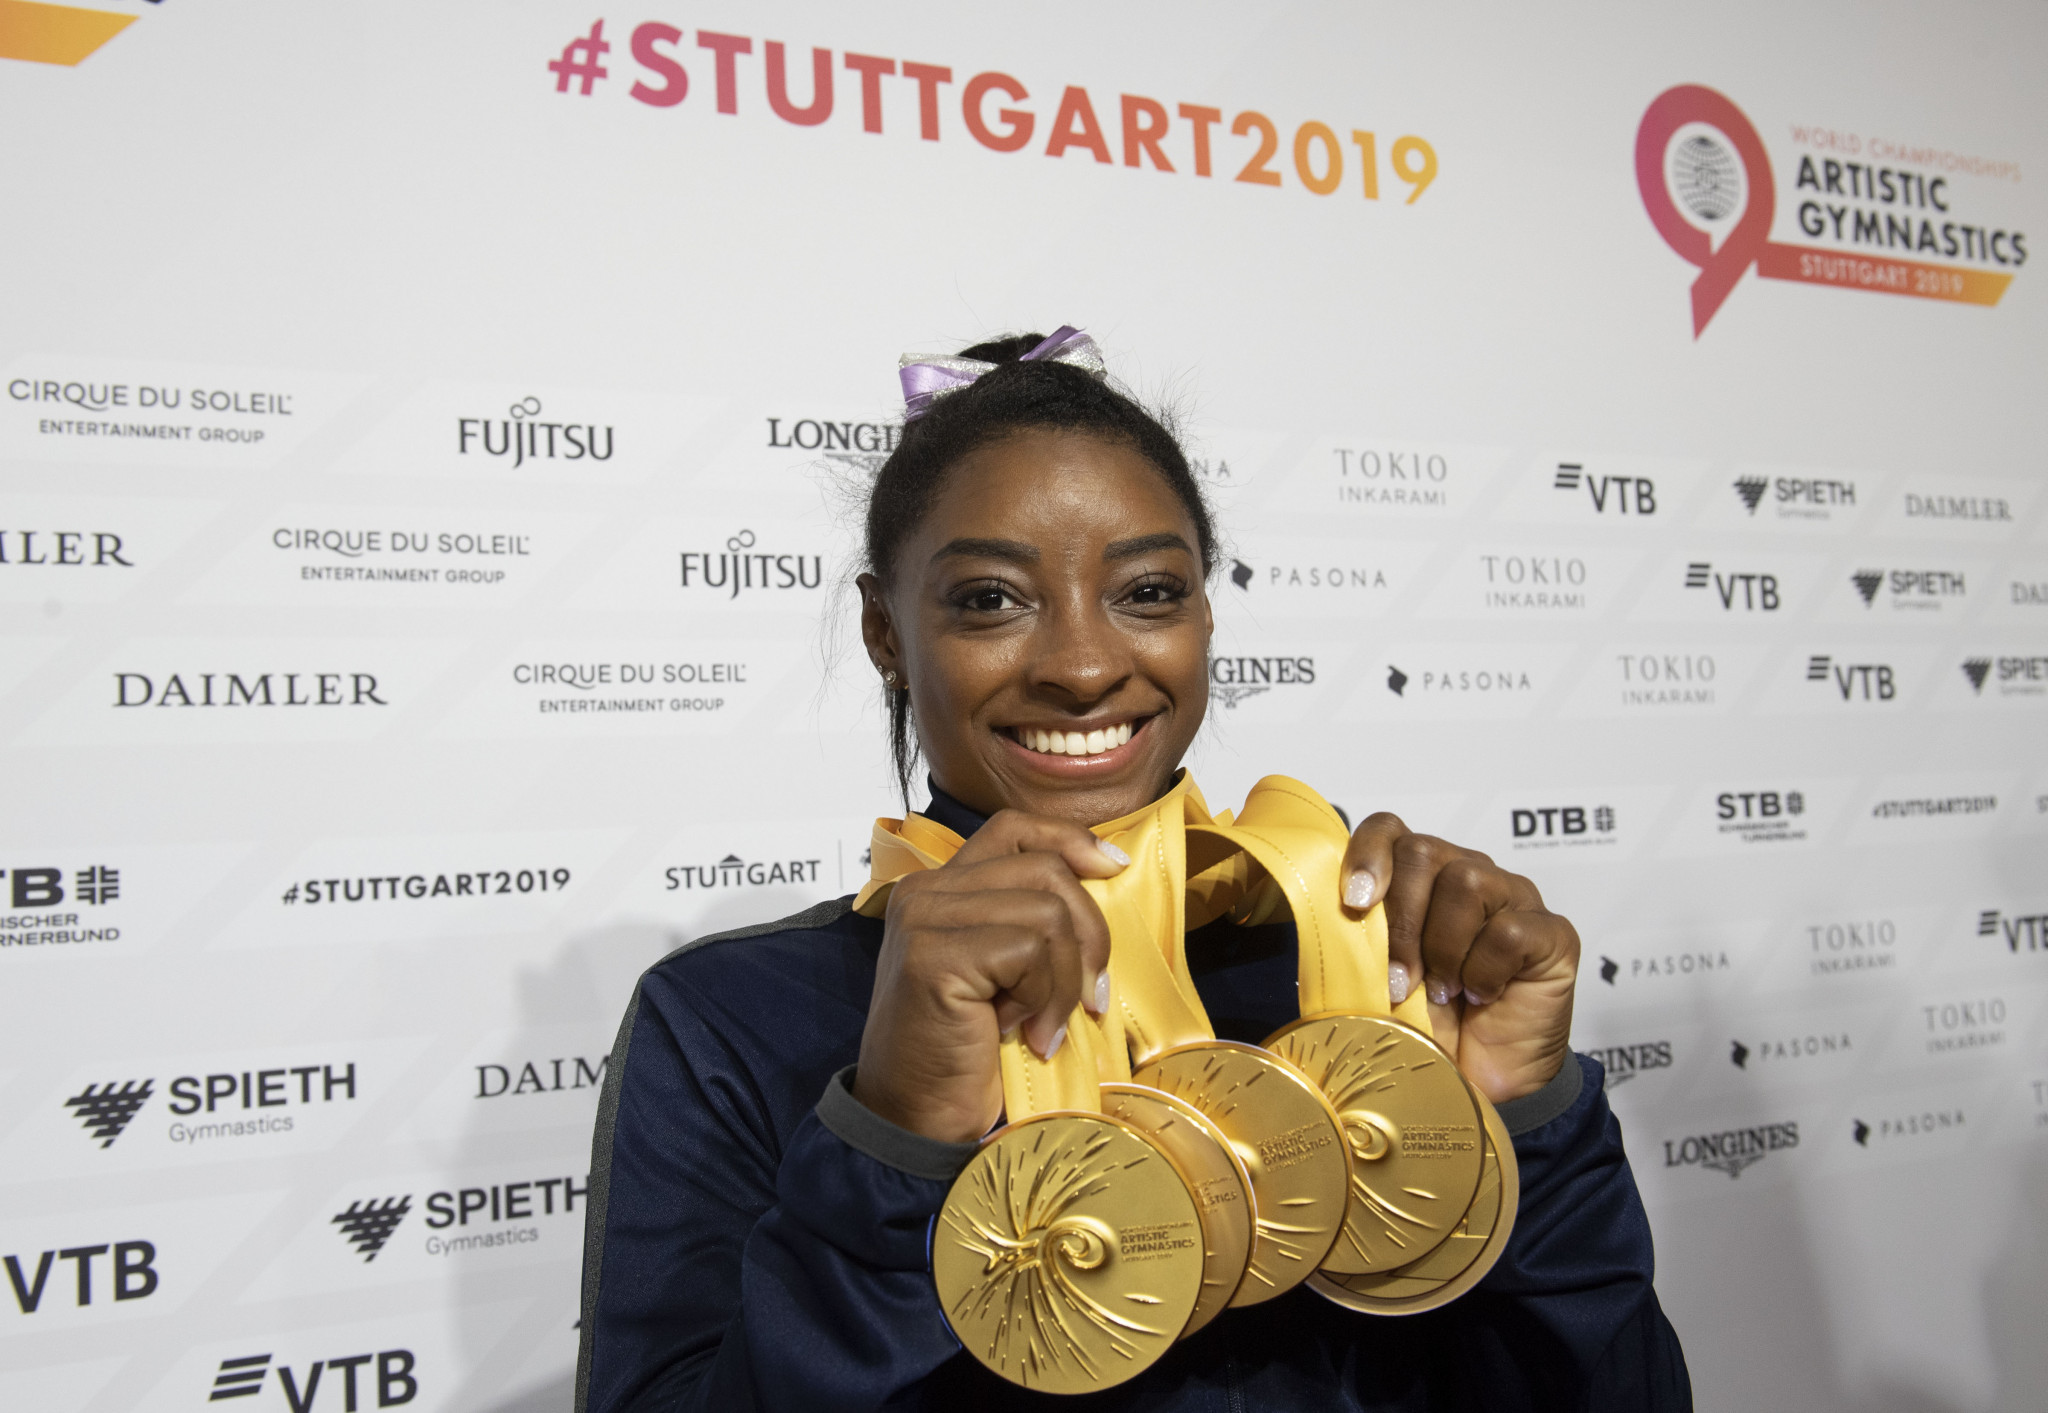 Simone Biles won five gold medals at the World Championships in 2019 ©Getty Images